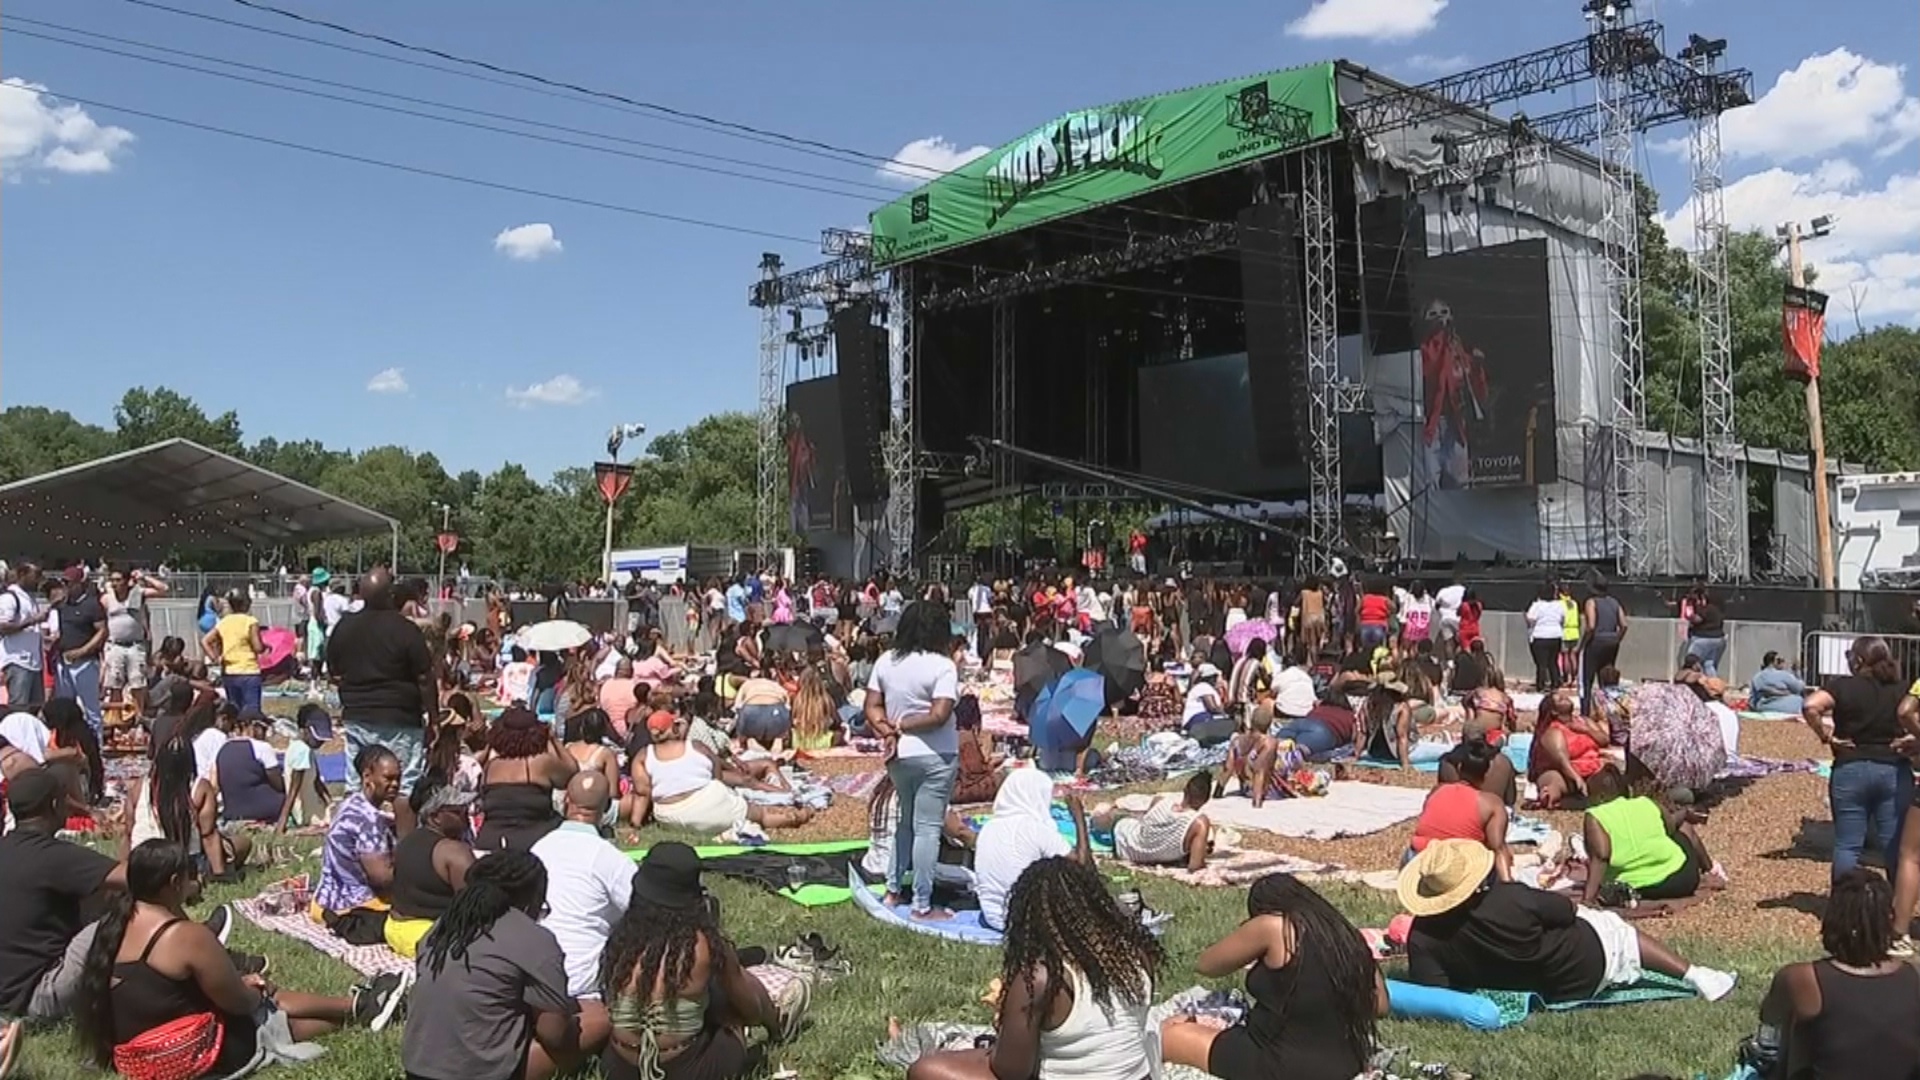 Attendees Enjoy Return Of Roots Picnic To Philadelphia After 2 Year Pandemic Pause: ‘It Feels Like We’re Getting Back To Normal’